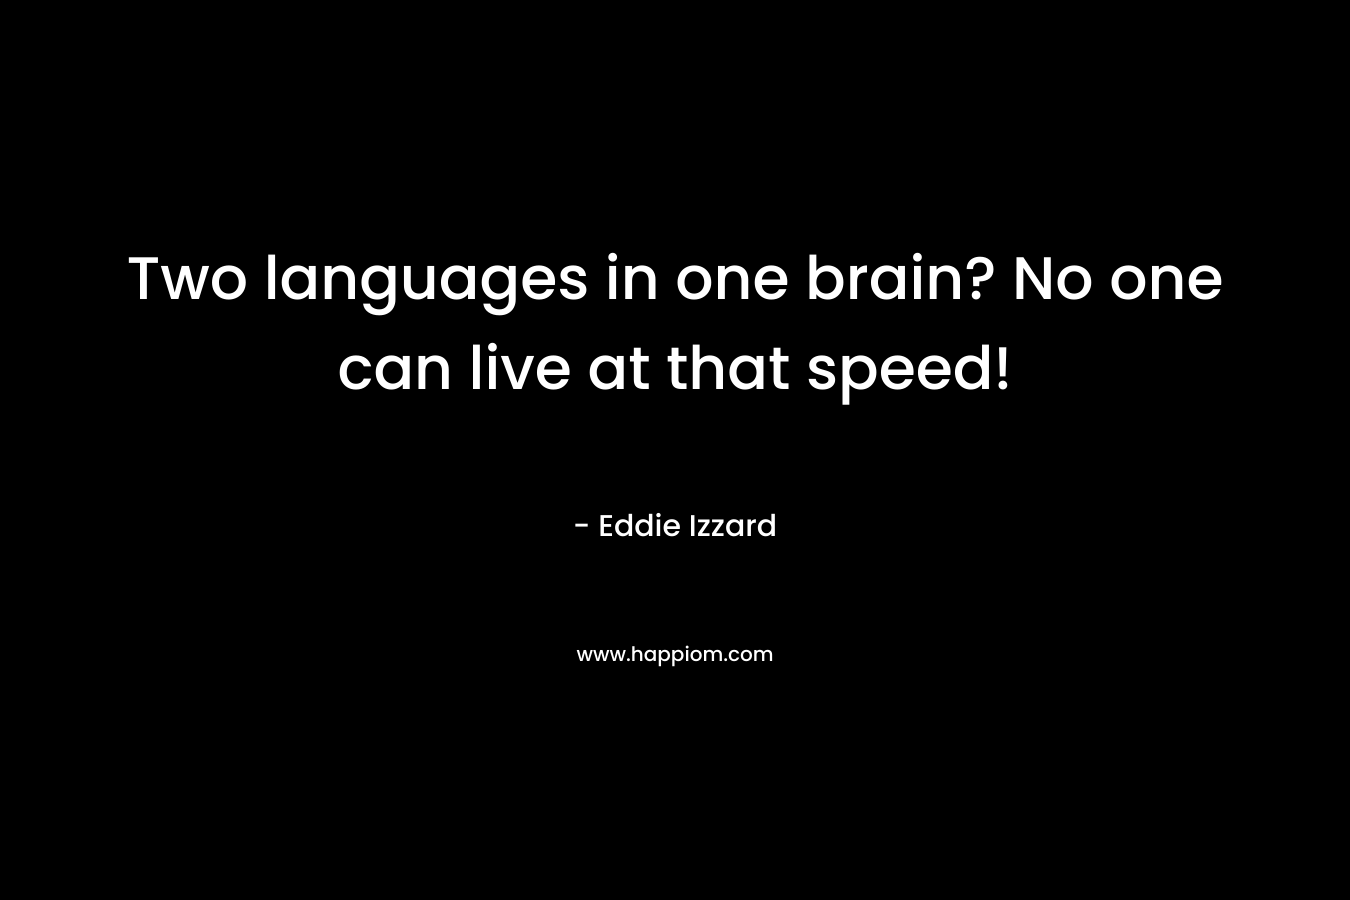 Two languages in one brain? No one can live at that speed!